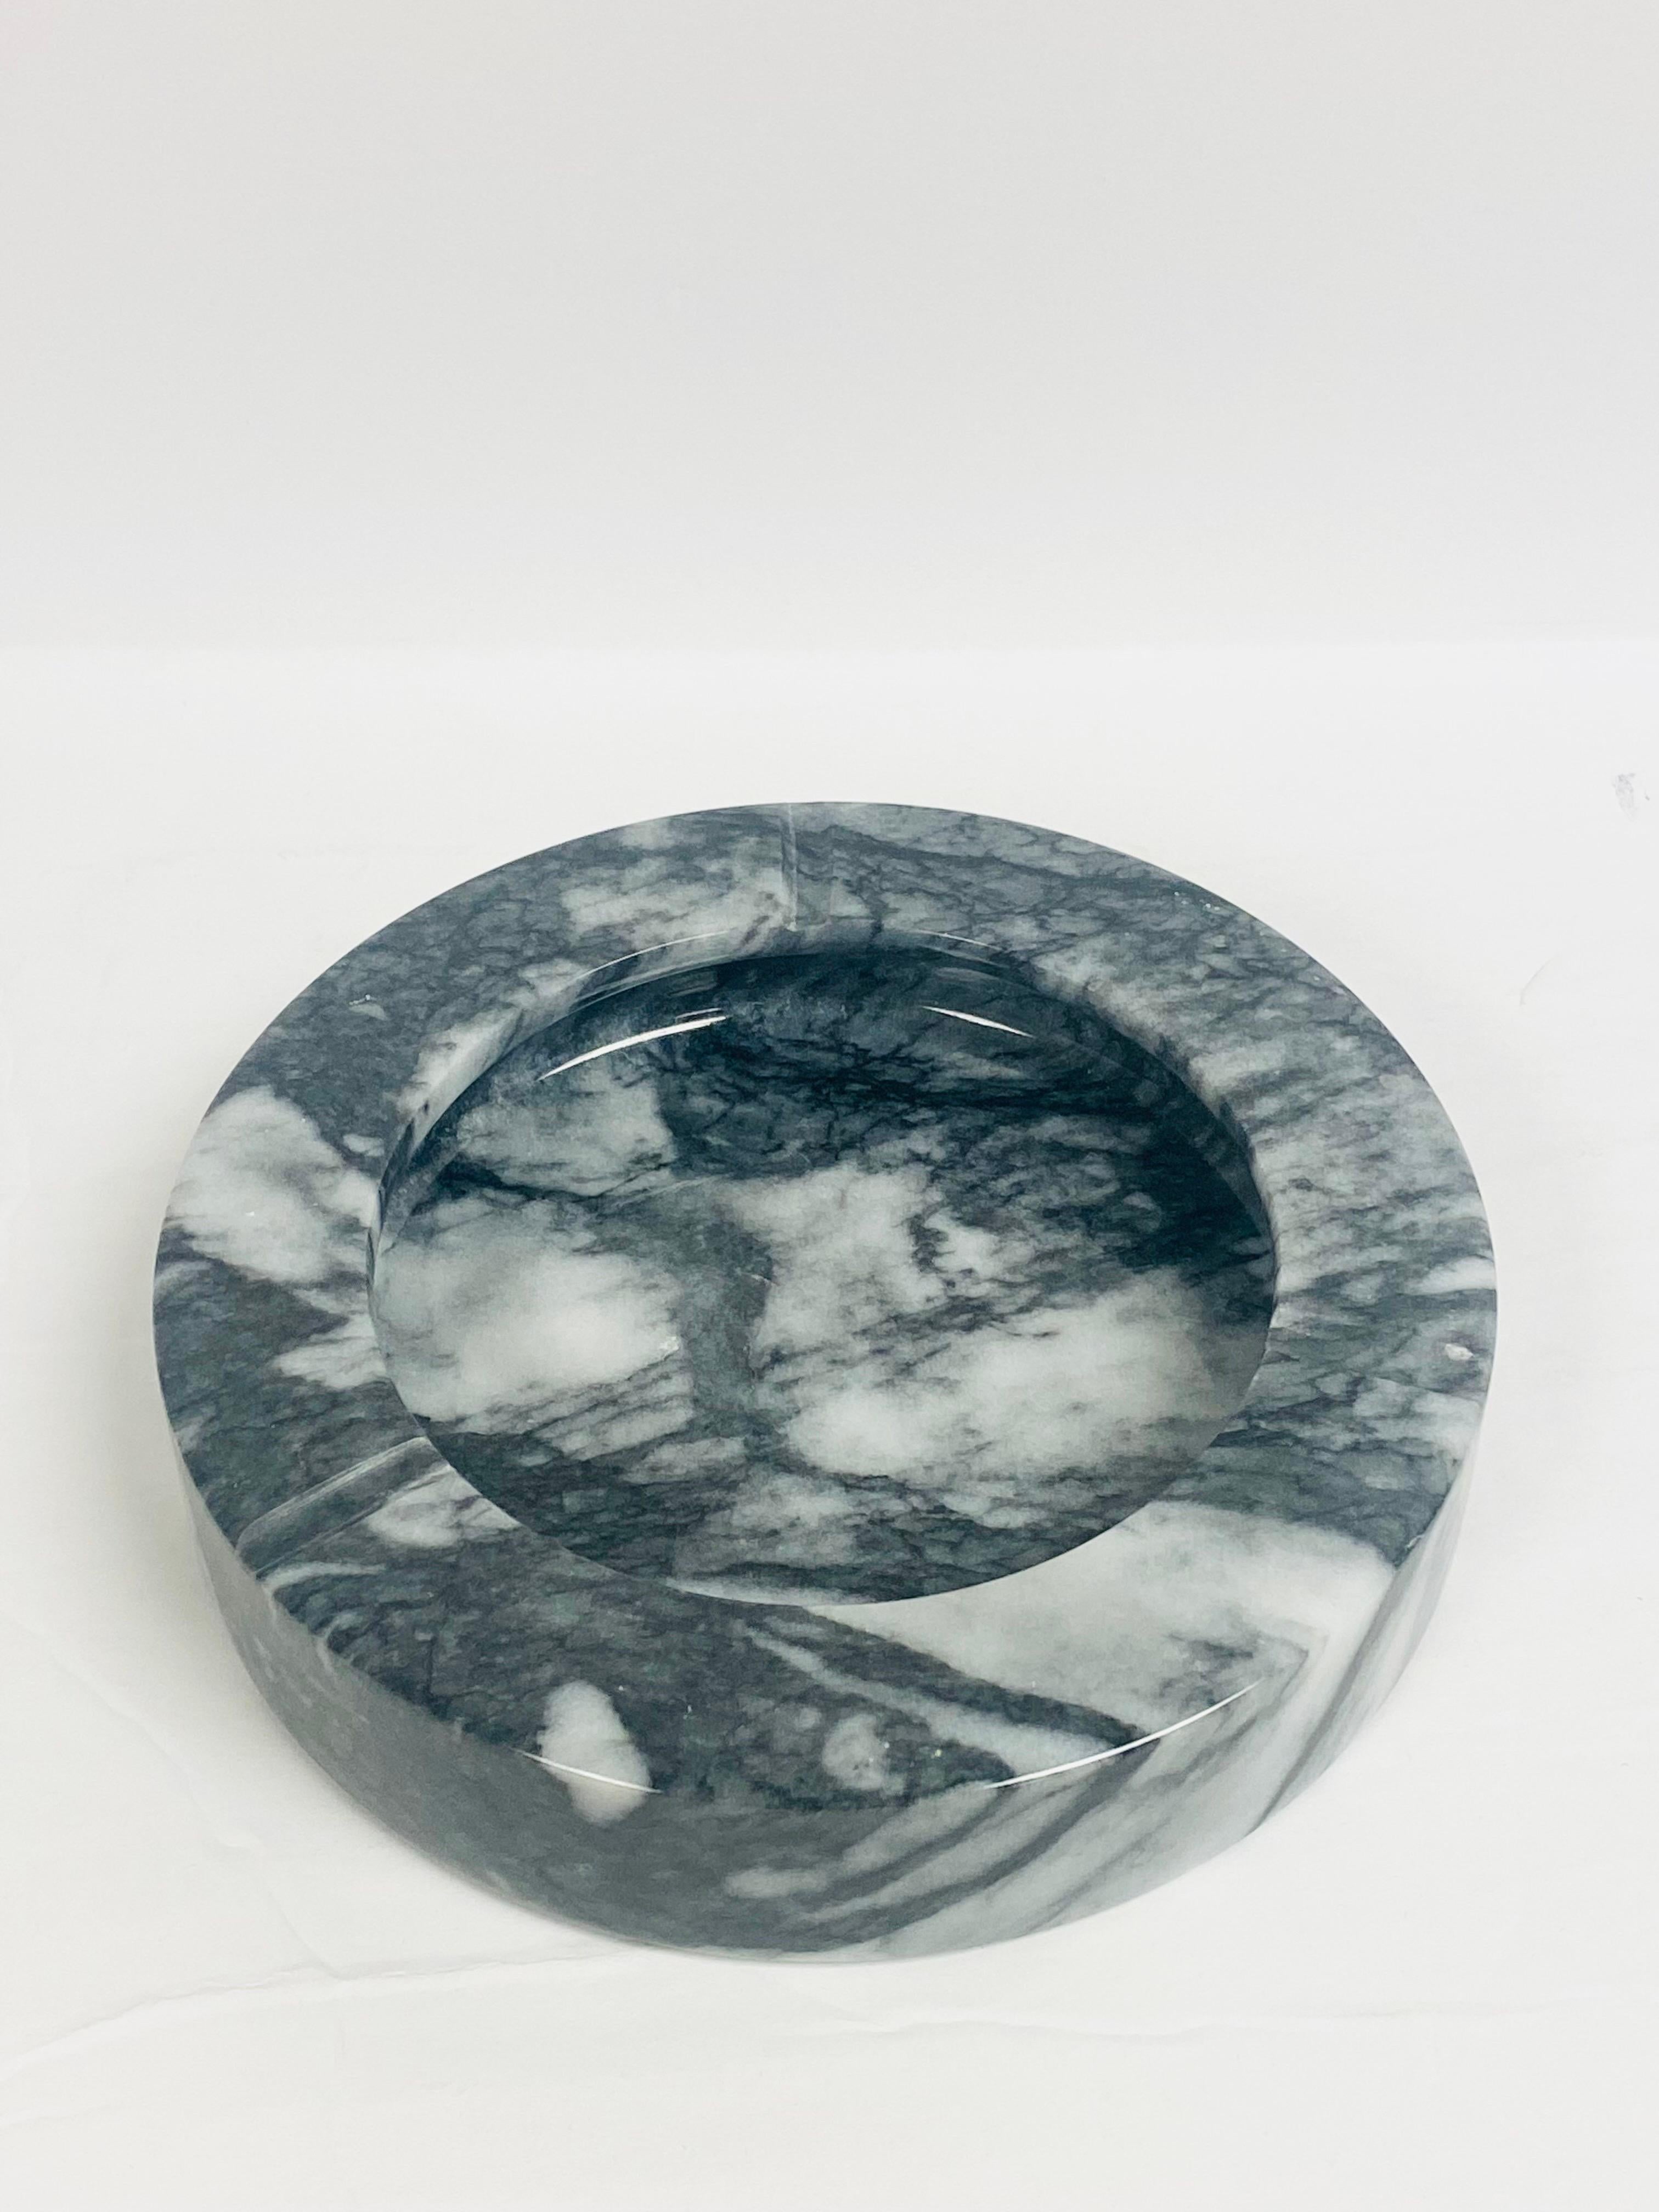 We are very pleased to offer a vintage ashtray, circa the 1970s. Handcrafted from marble by skilled artisans this polished stone ashtray features three cigarette rests. Stunning, dense veins throughout it give it a unique look and lots of movement.